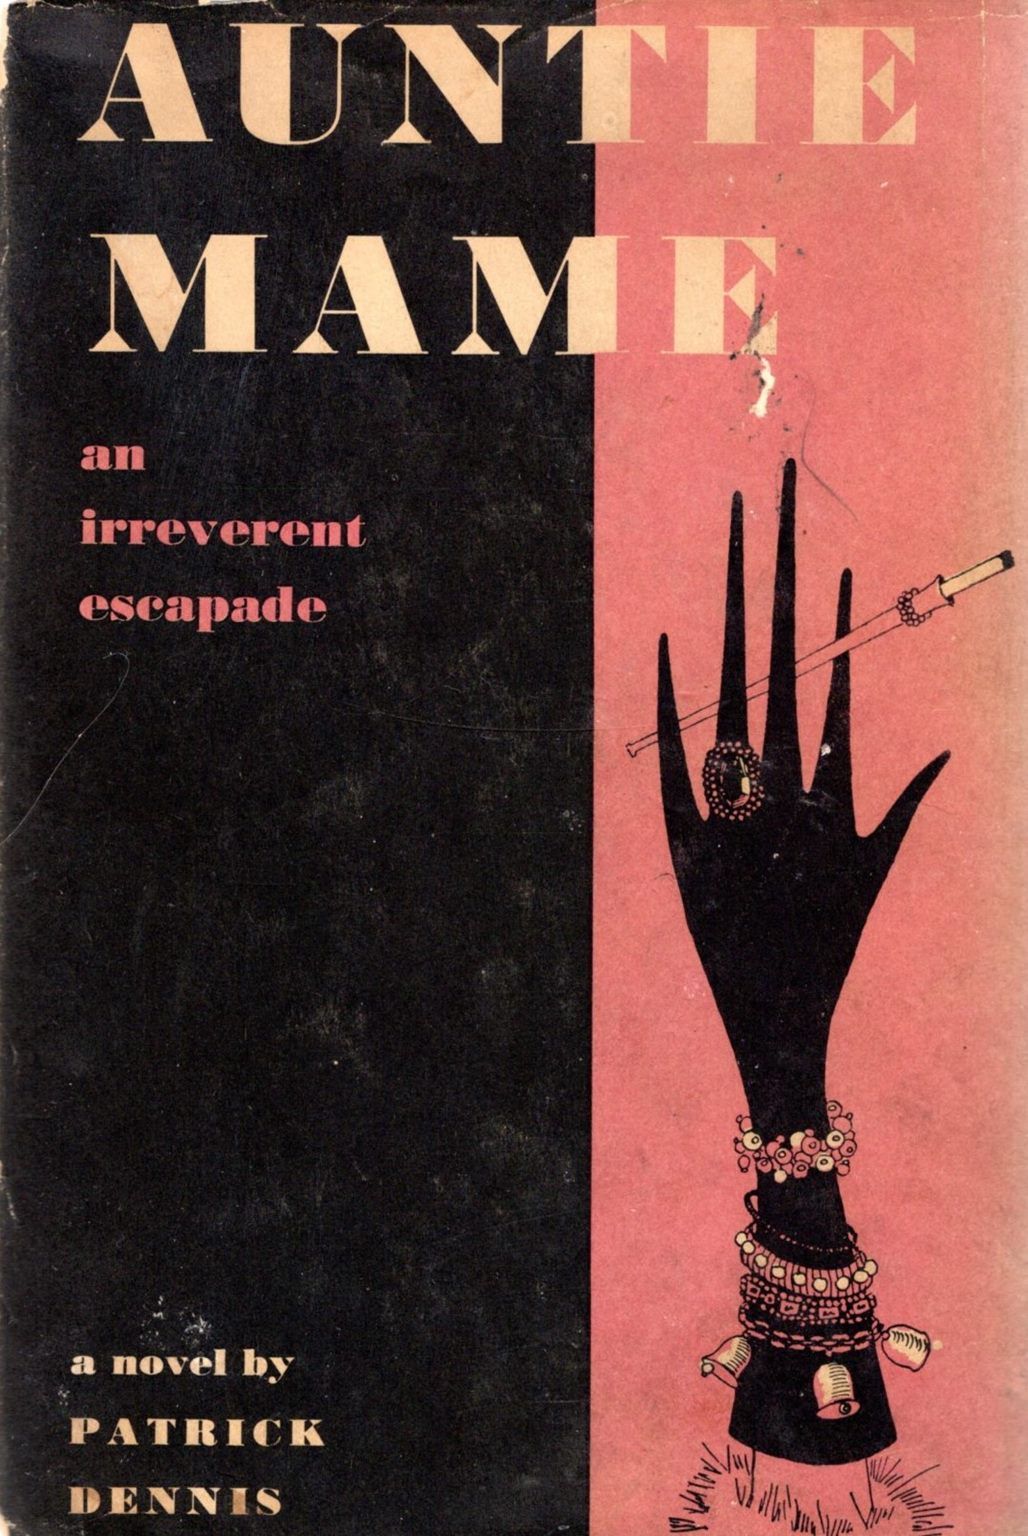 AUNTIE MAME: An Irreverent Episode